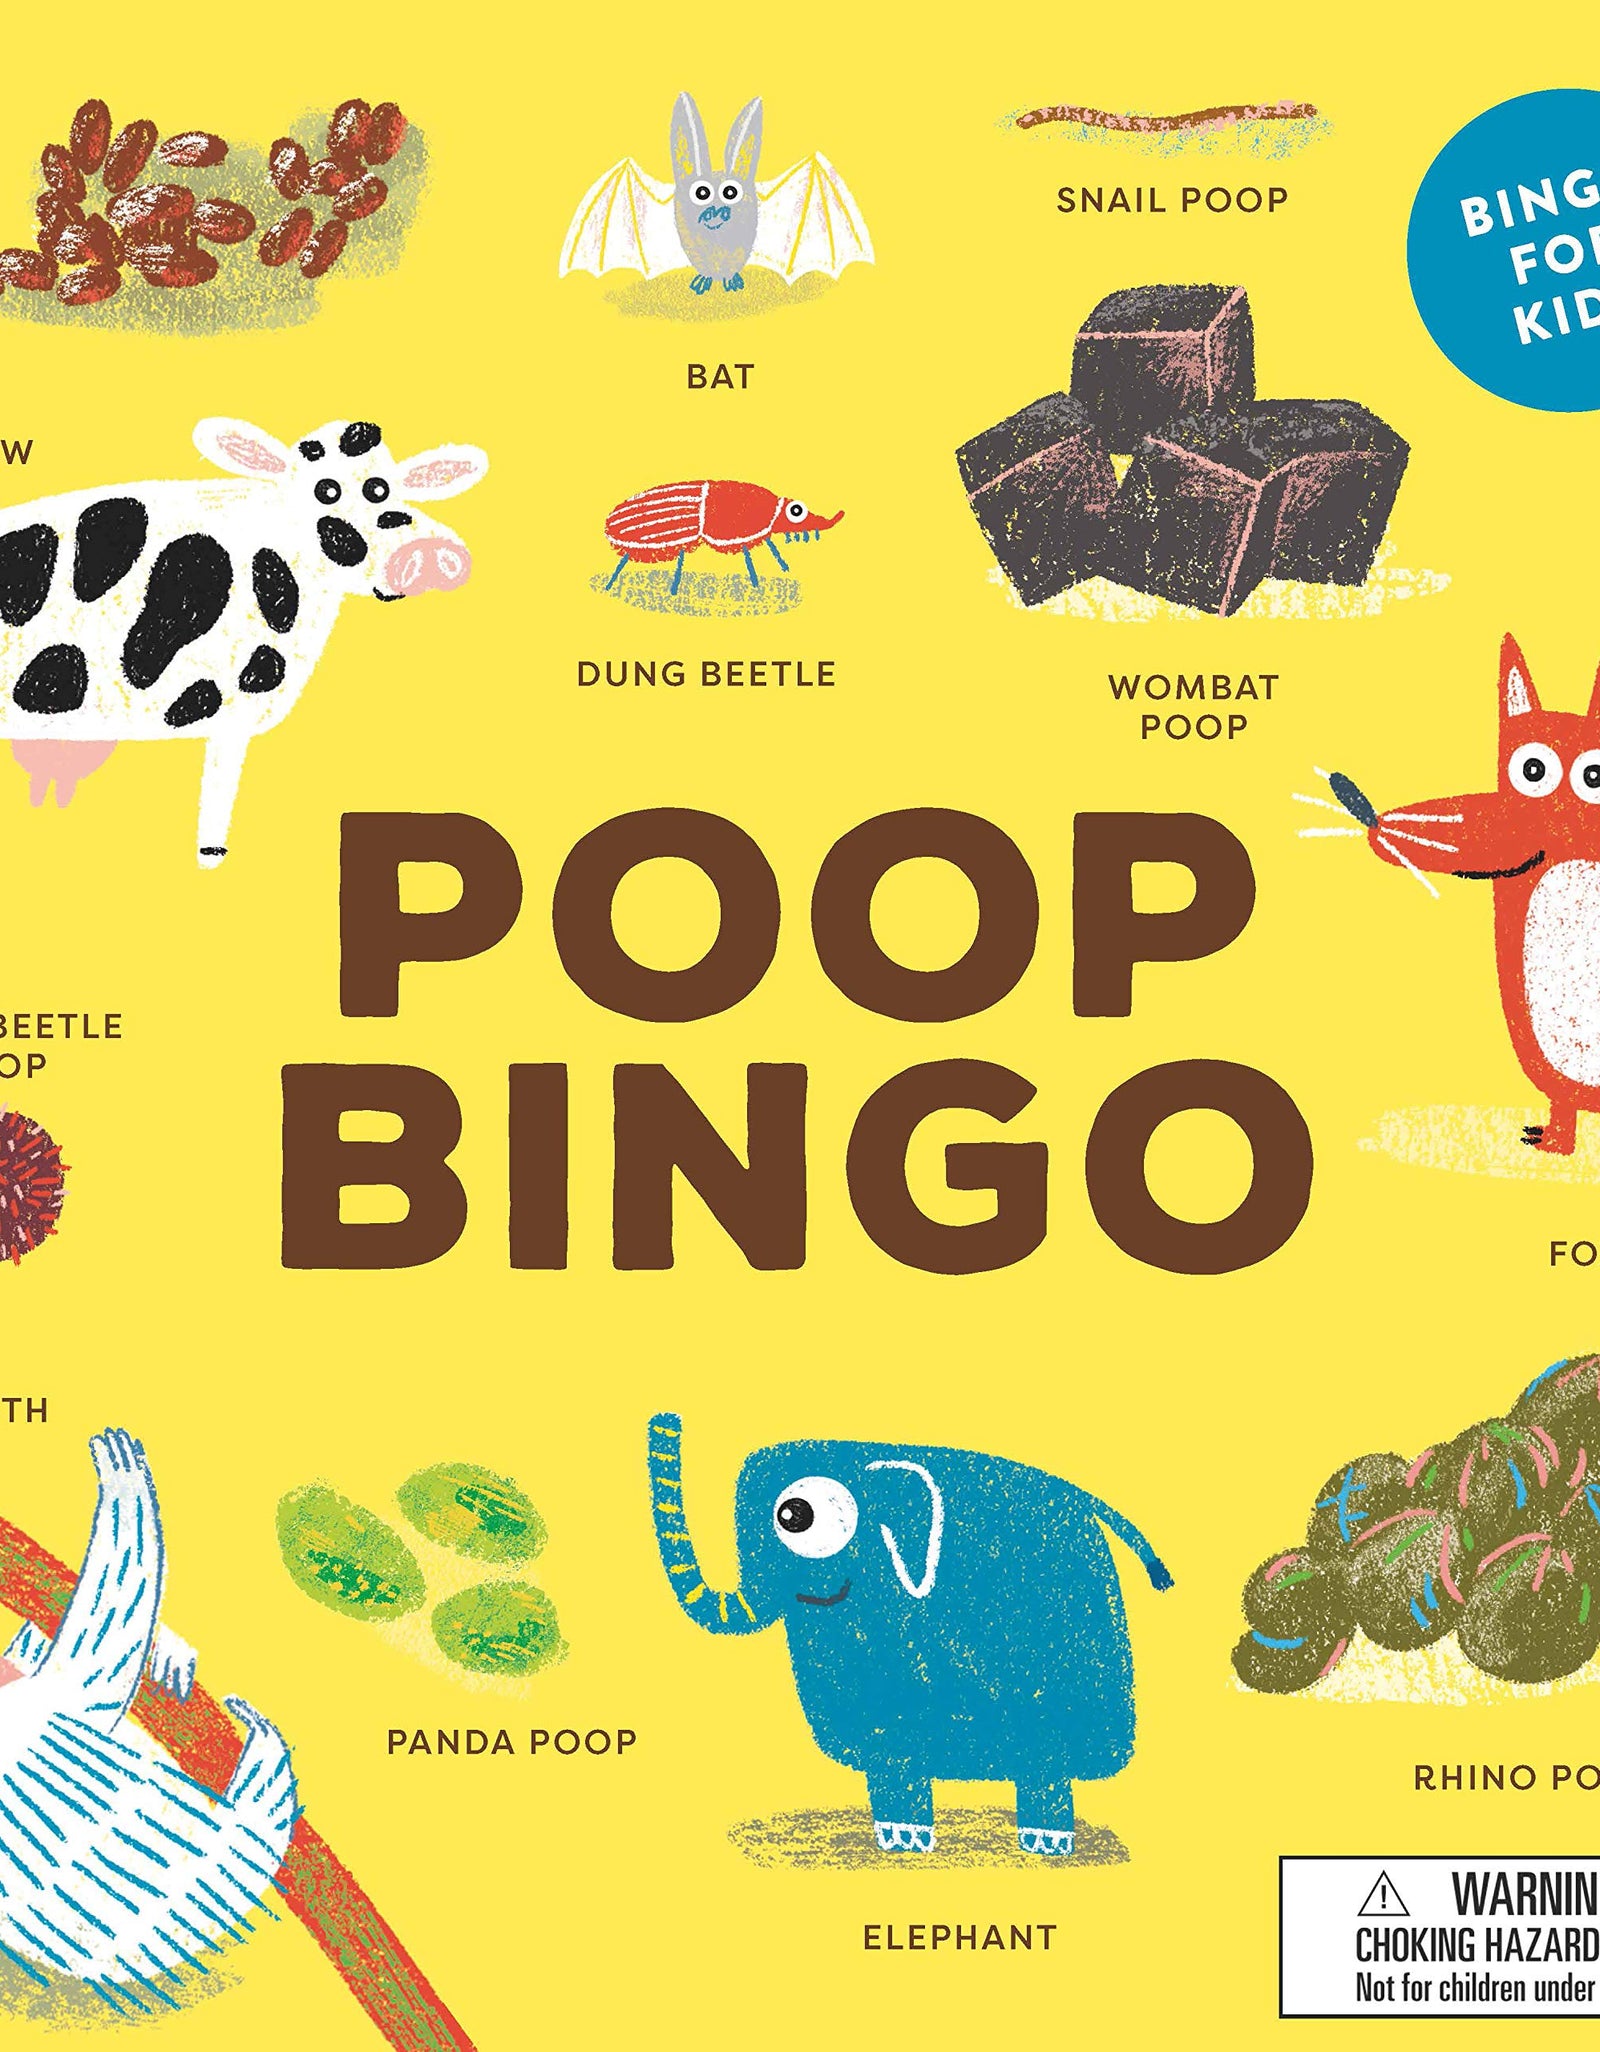 Laurence King Publishing Poop Bingo: A Hilarious and Fascinating Educational Game for Kids!